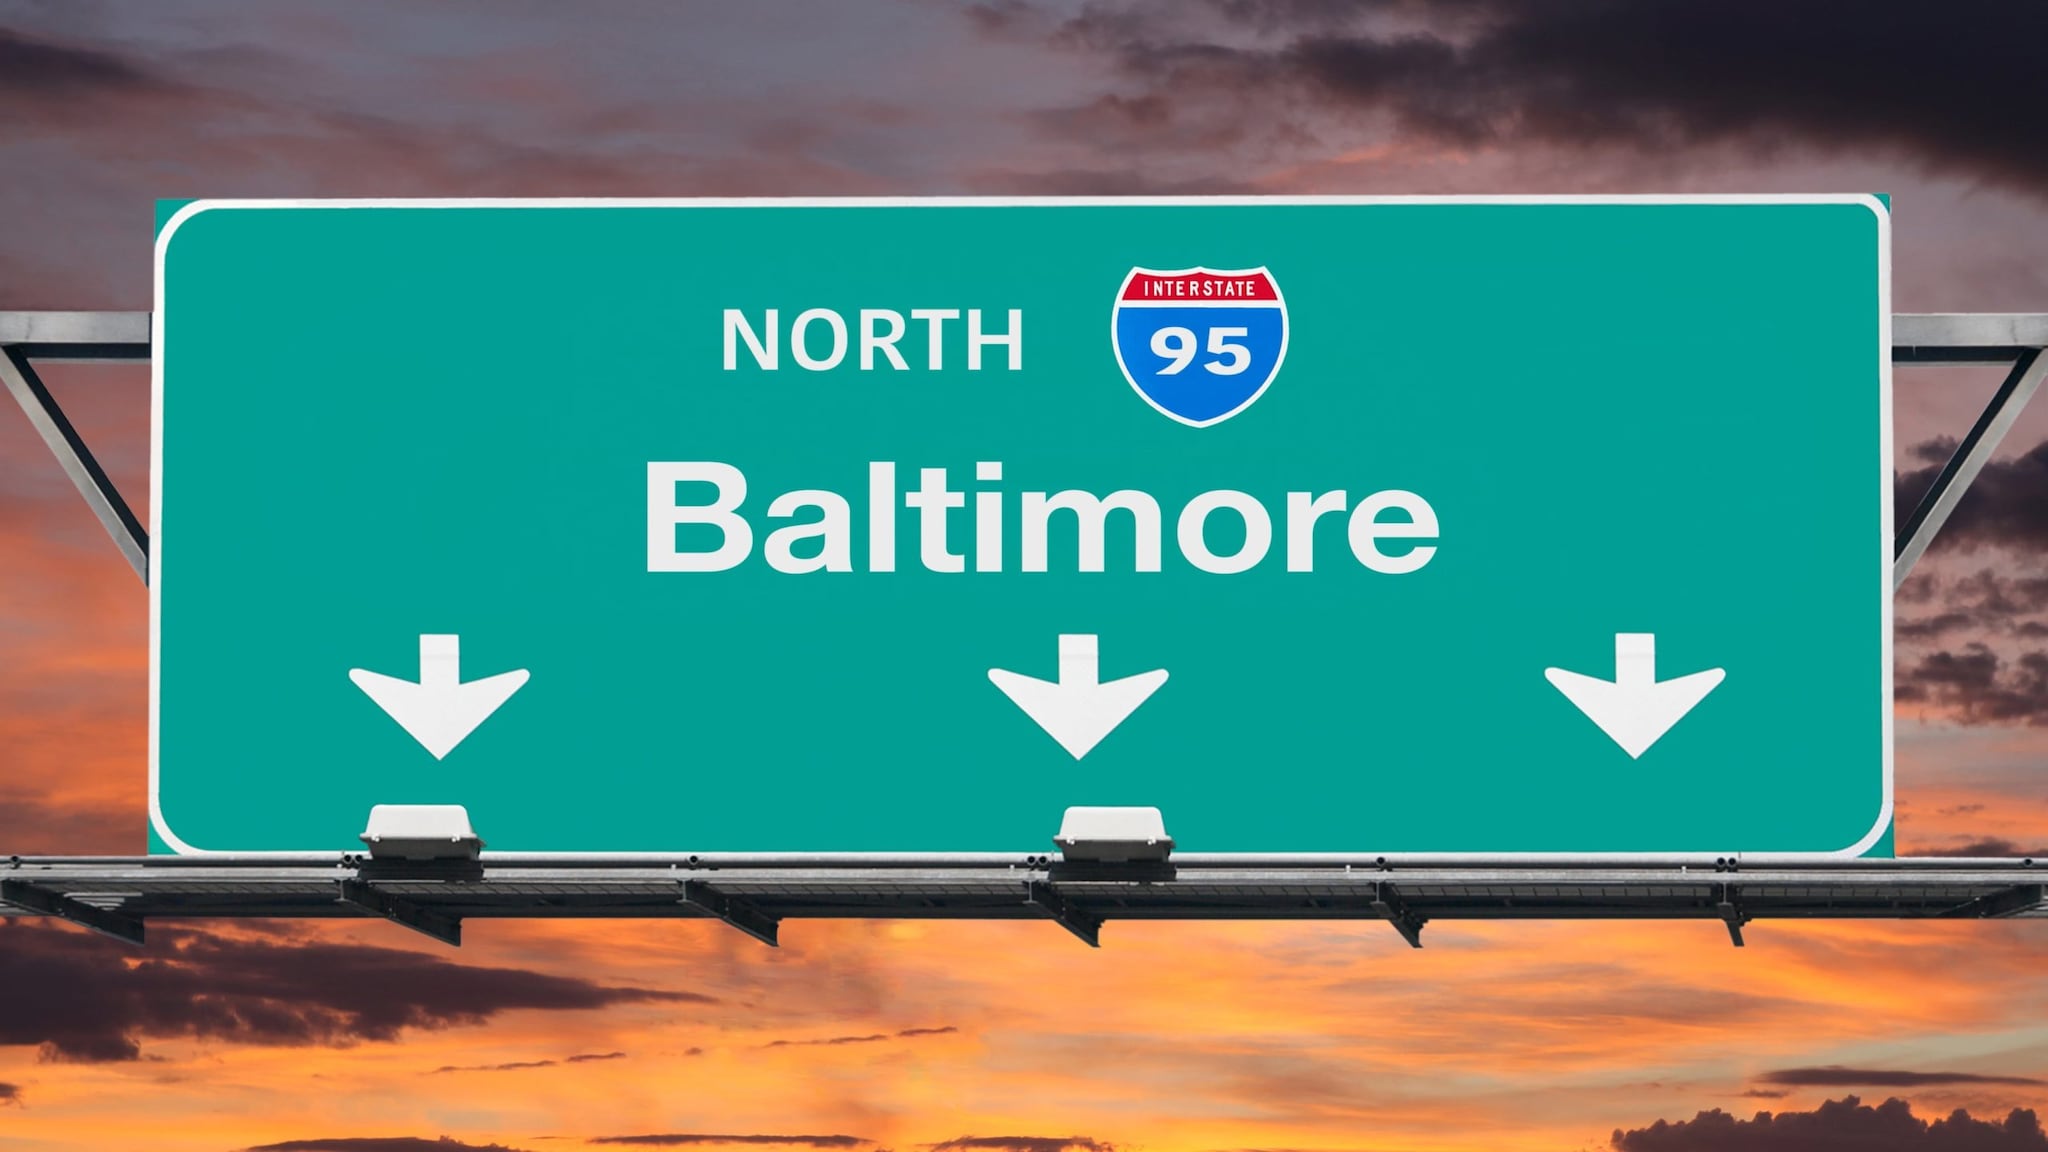 Highway exit sign for Baltimore